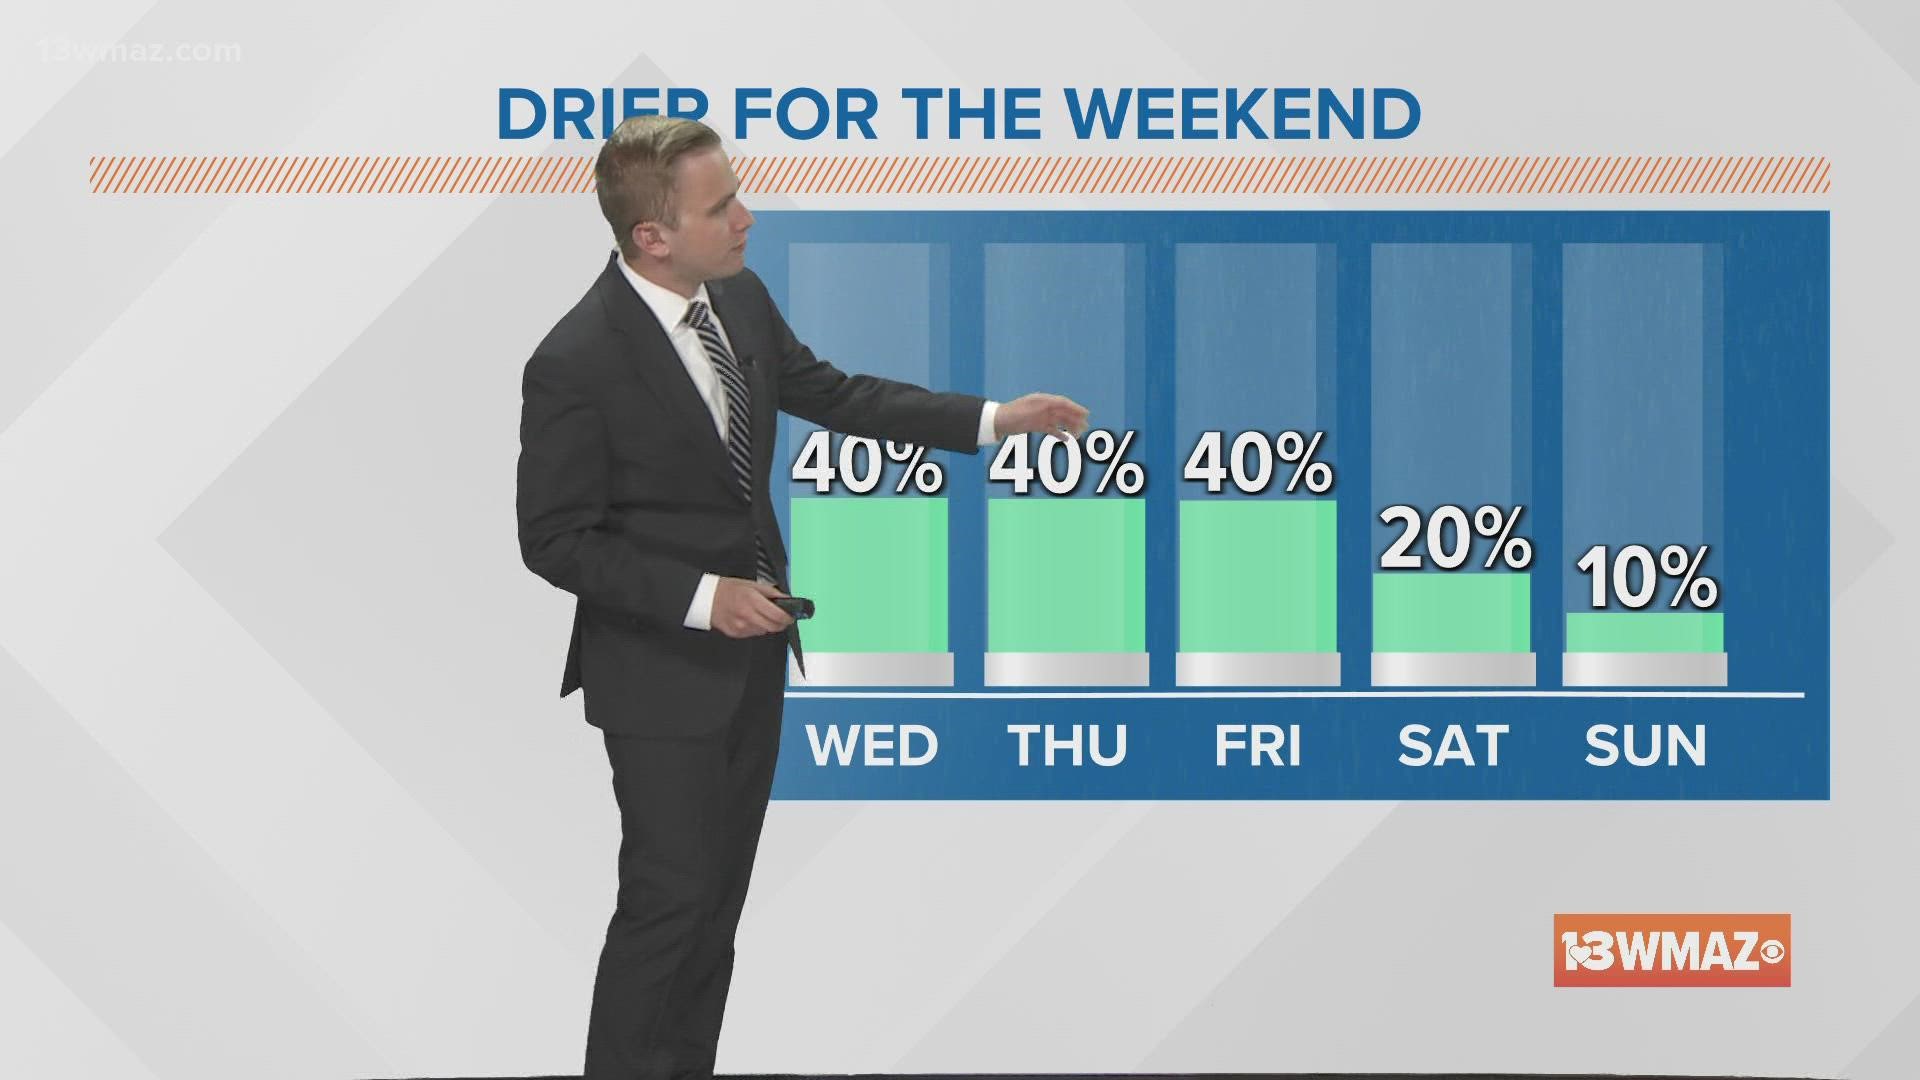 Drying out just in time for the weekend!